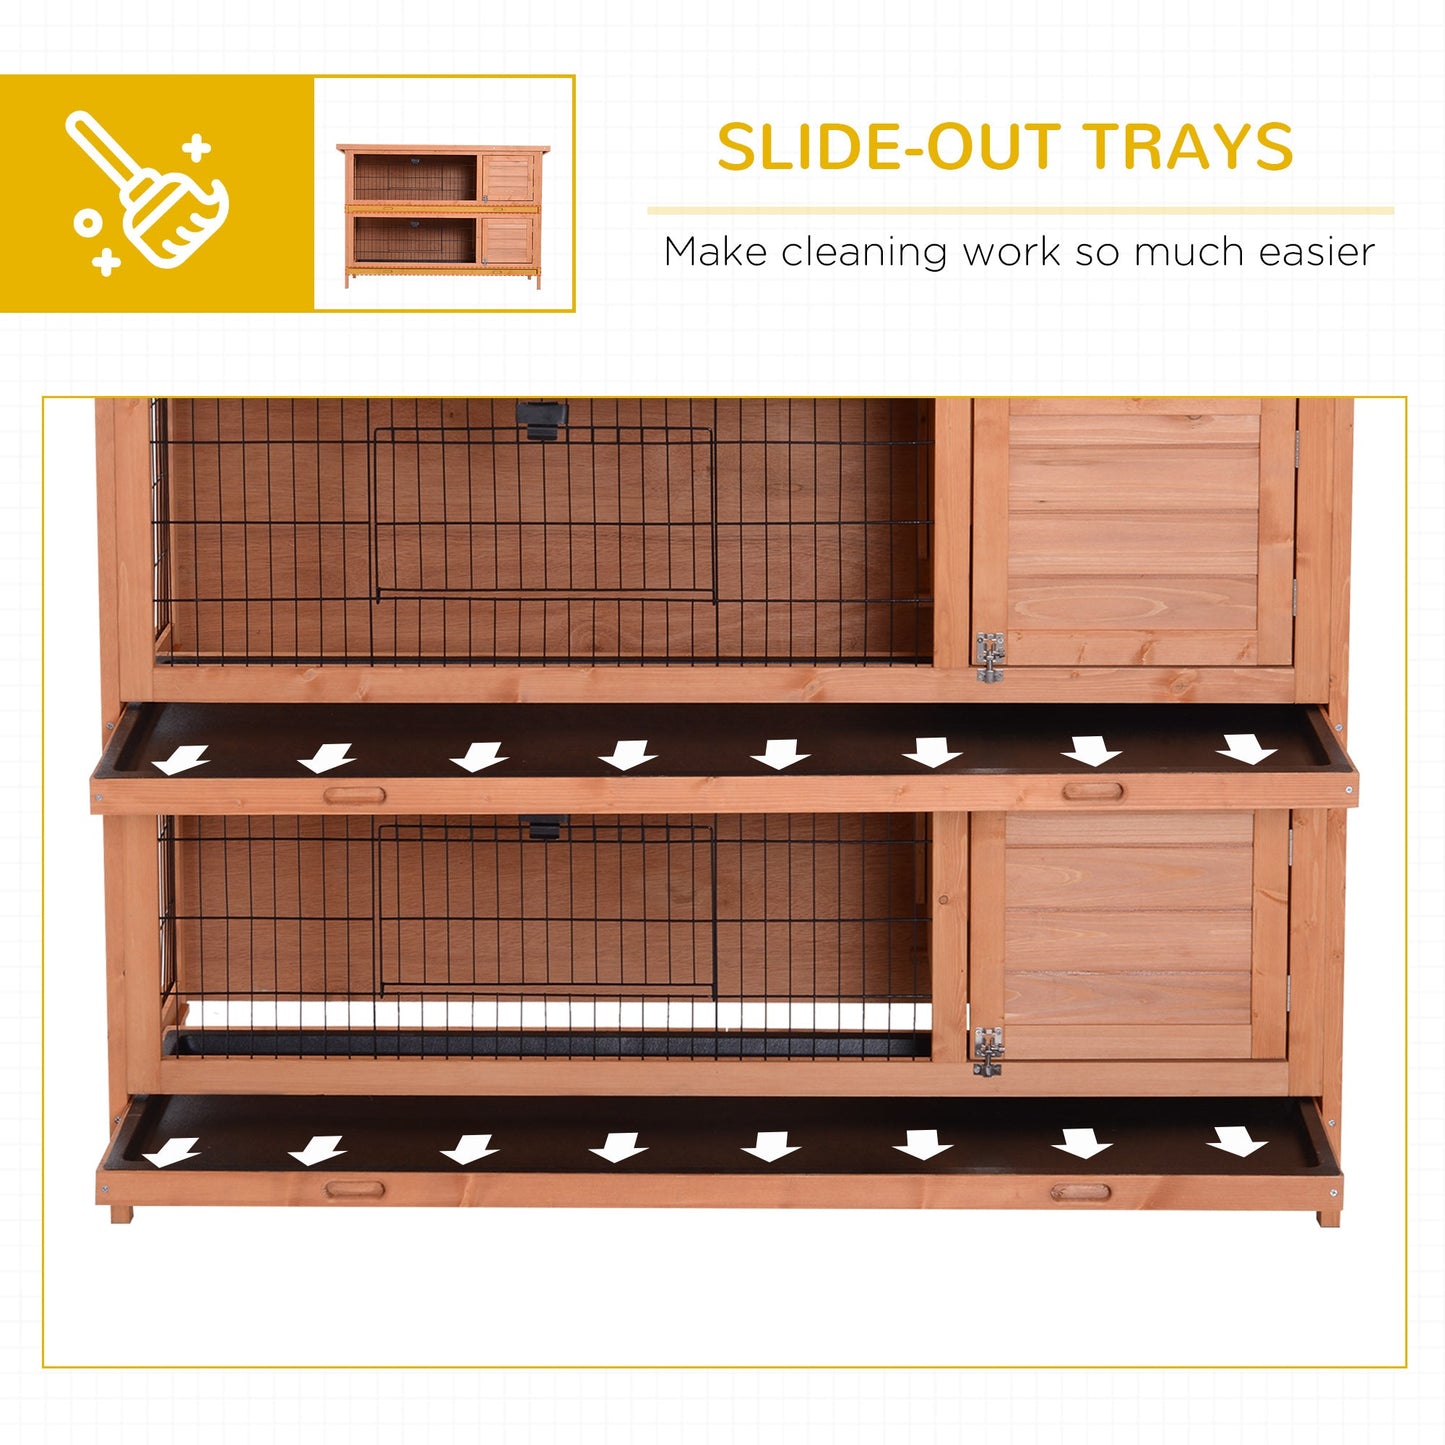 -Pawhut 54" Outdoor Rabbit Cage, 2-tier Rabbit Hutch Guinea with Removable Dividers and Pull-Out Trays - Outdoor Style Company